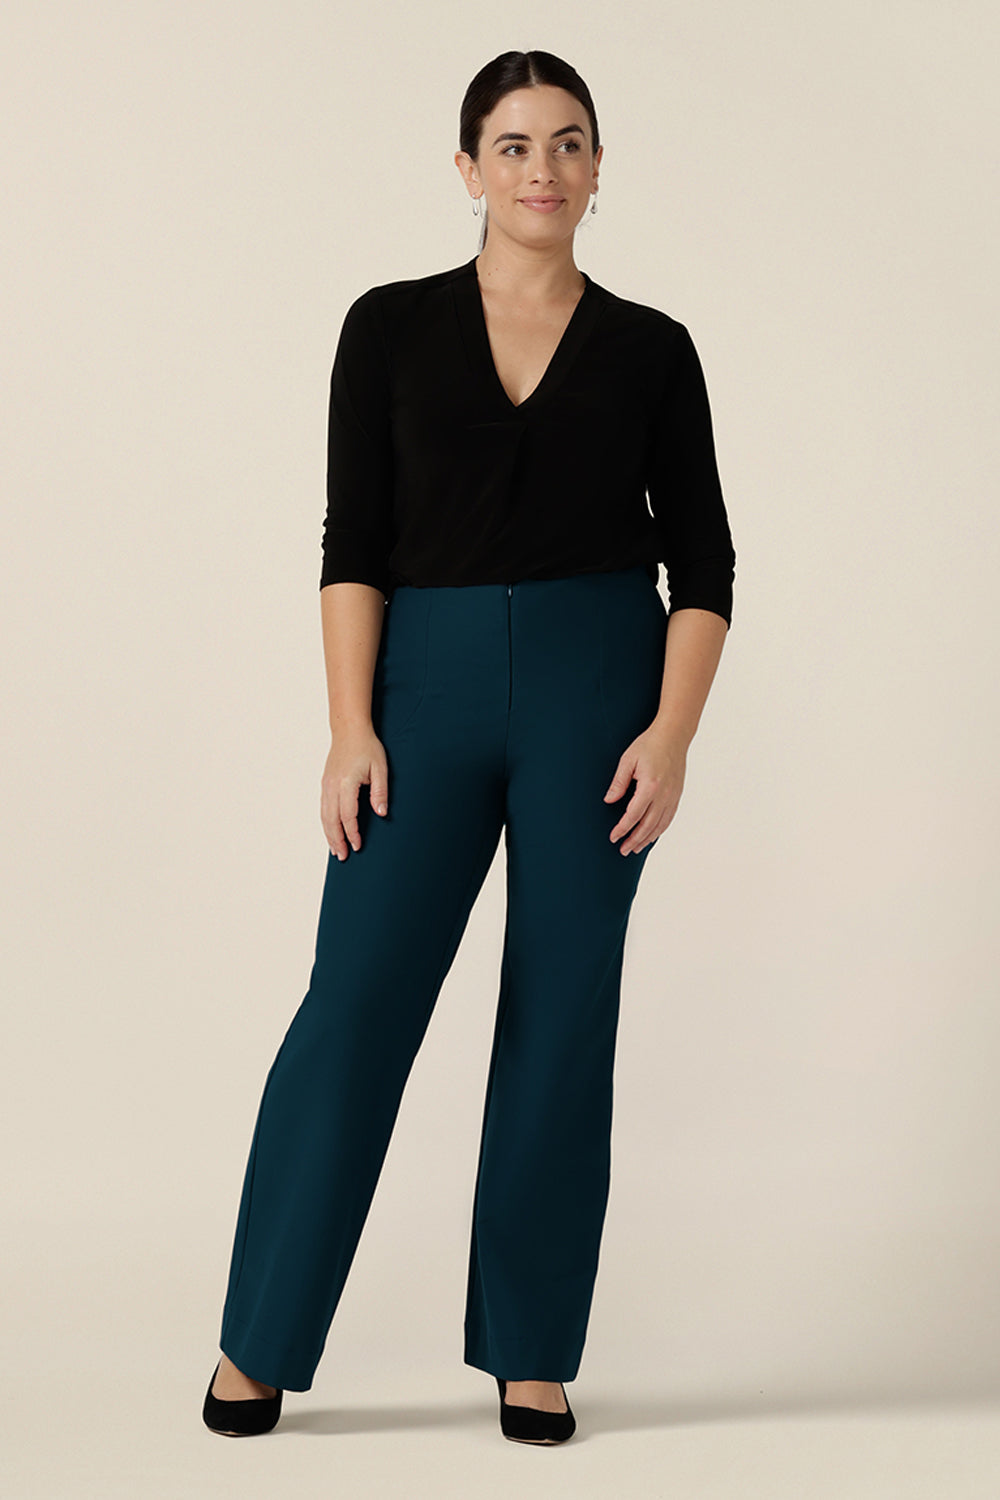 A size 10 woman wears petrol blue, tailored bootcut pants with a long sleeve black jersey top for an office wear look. Made in Australia in ponte fabric, these comfortable work pants are great for curvy women - shop in sizes 8 to 24.